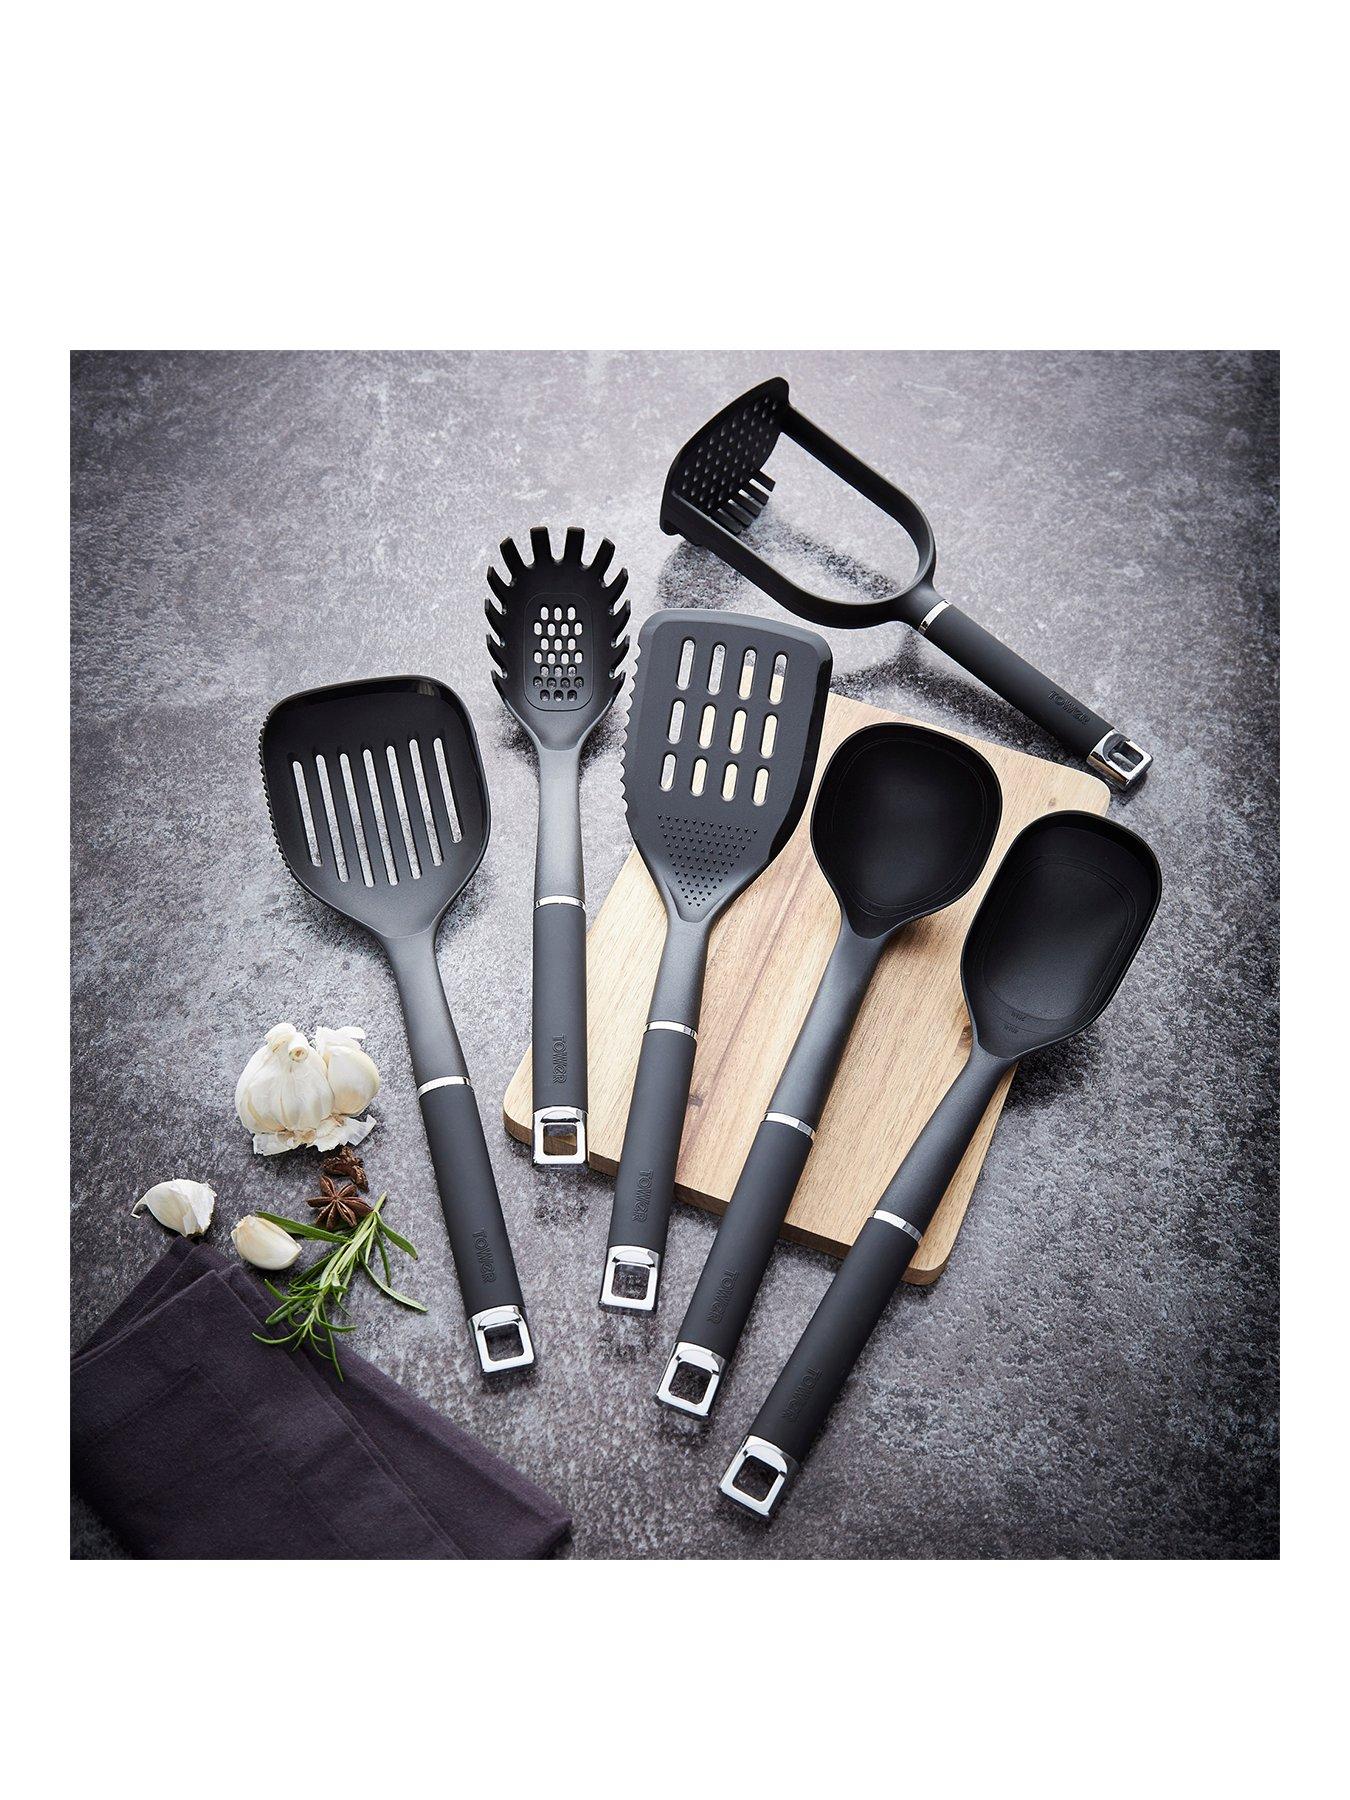 Silicone Cooking Utensils Set, Heat Resistant Kitchen Utensils, Turner,  Tongs, Spatula, Spoon, Brush, Spoon Rest, Wooden Handle Kitchen Cooking  Utensils With Holder For Nonstick Cookware, Dishwasher Safe, Bpa Free,  Chrismas Halloween Gifts 